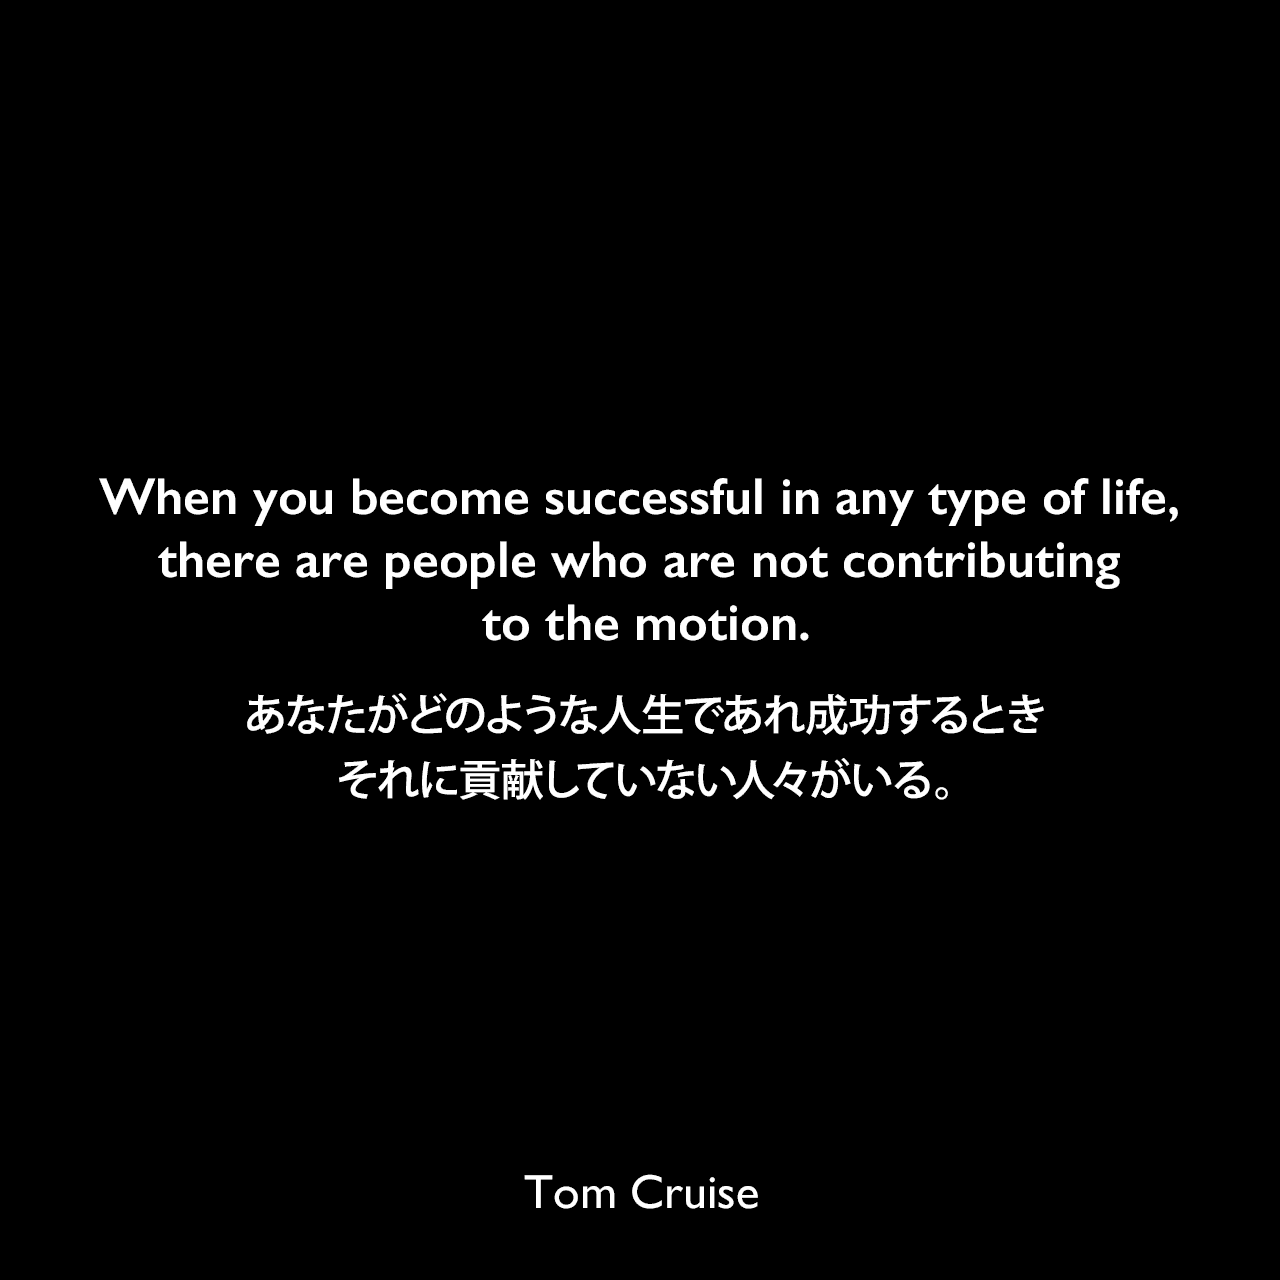 When you become successful in any type of life, there are people who are not contributing to the motion.あなたがどのような人生であれ成功するとき、それに貢献していない人々がいる。Tom Cruise